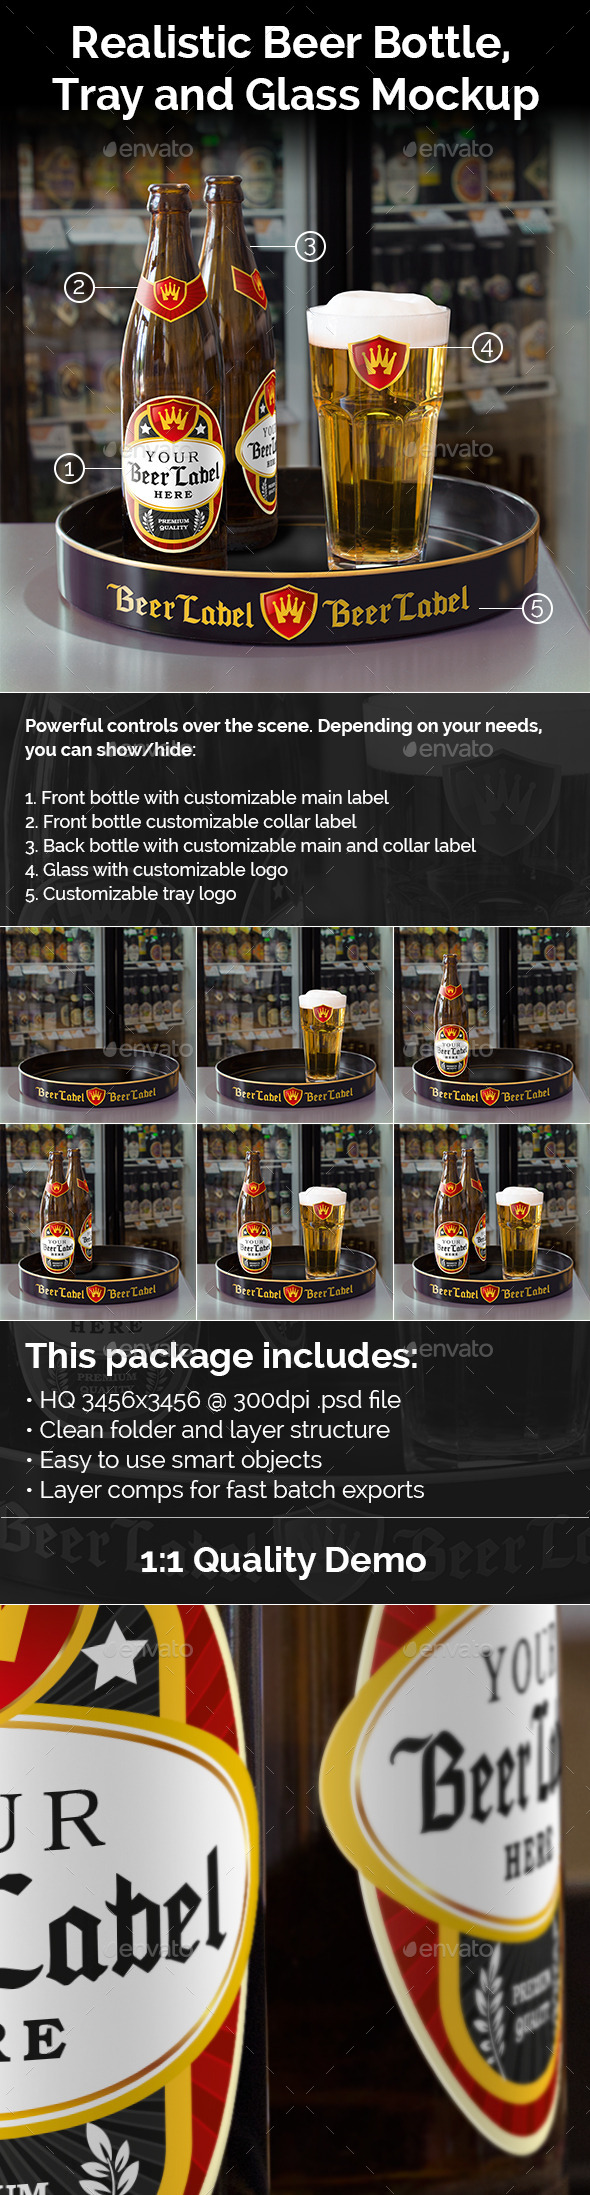 Realistic Beer Bottle, Tray and Glass Mockup